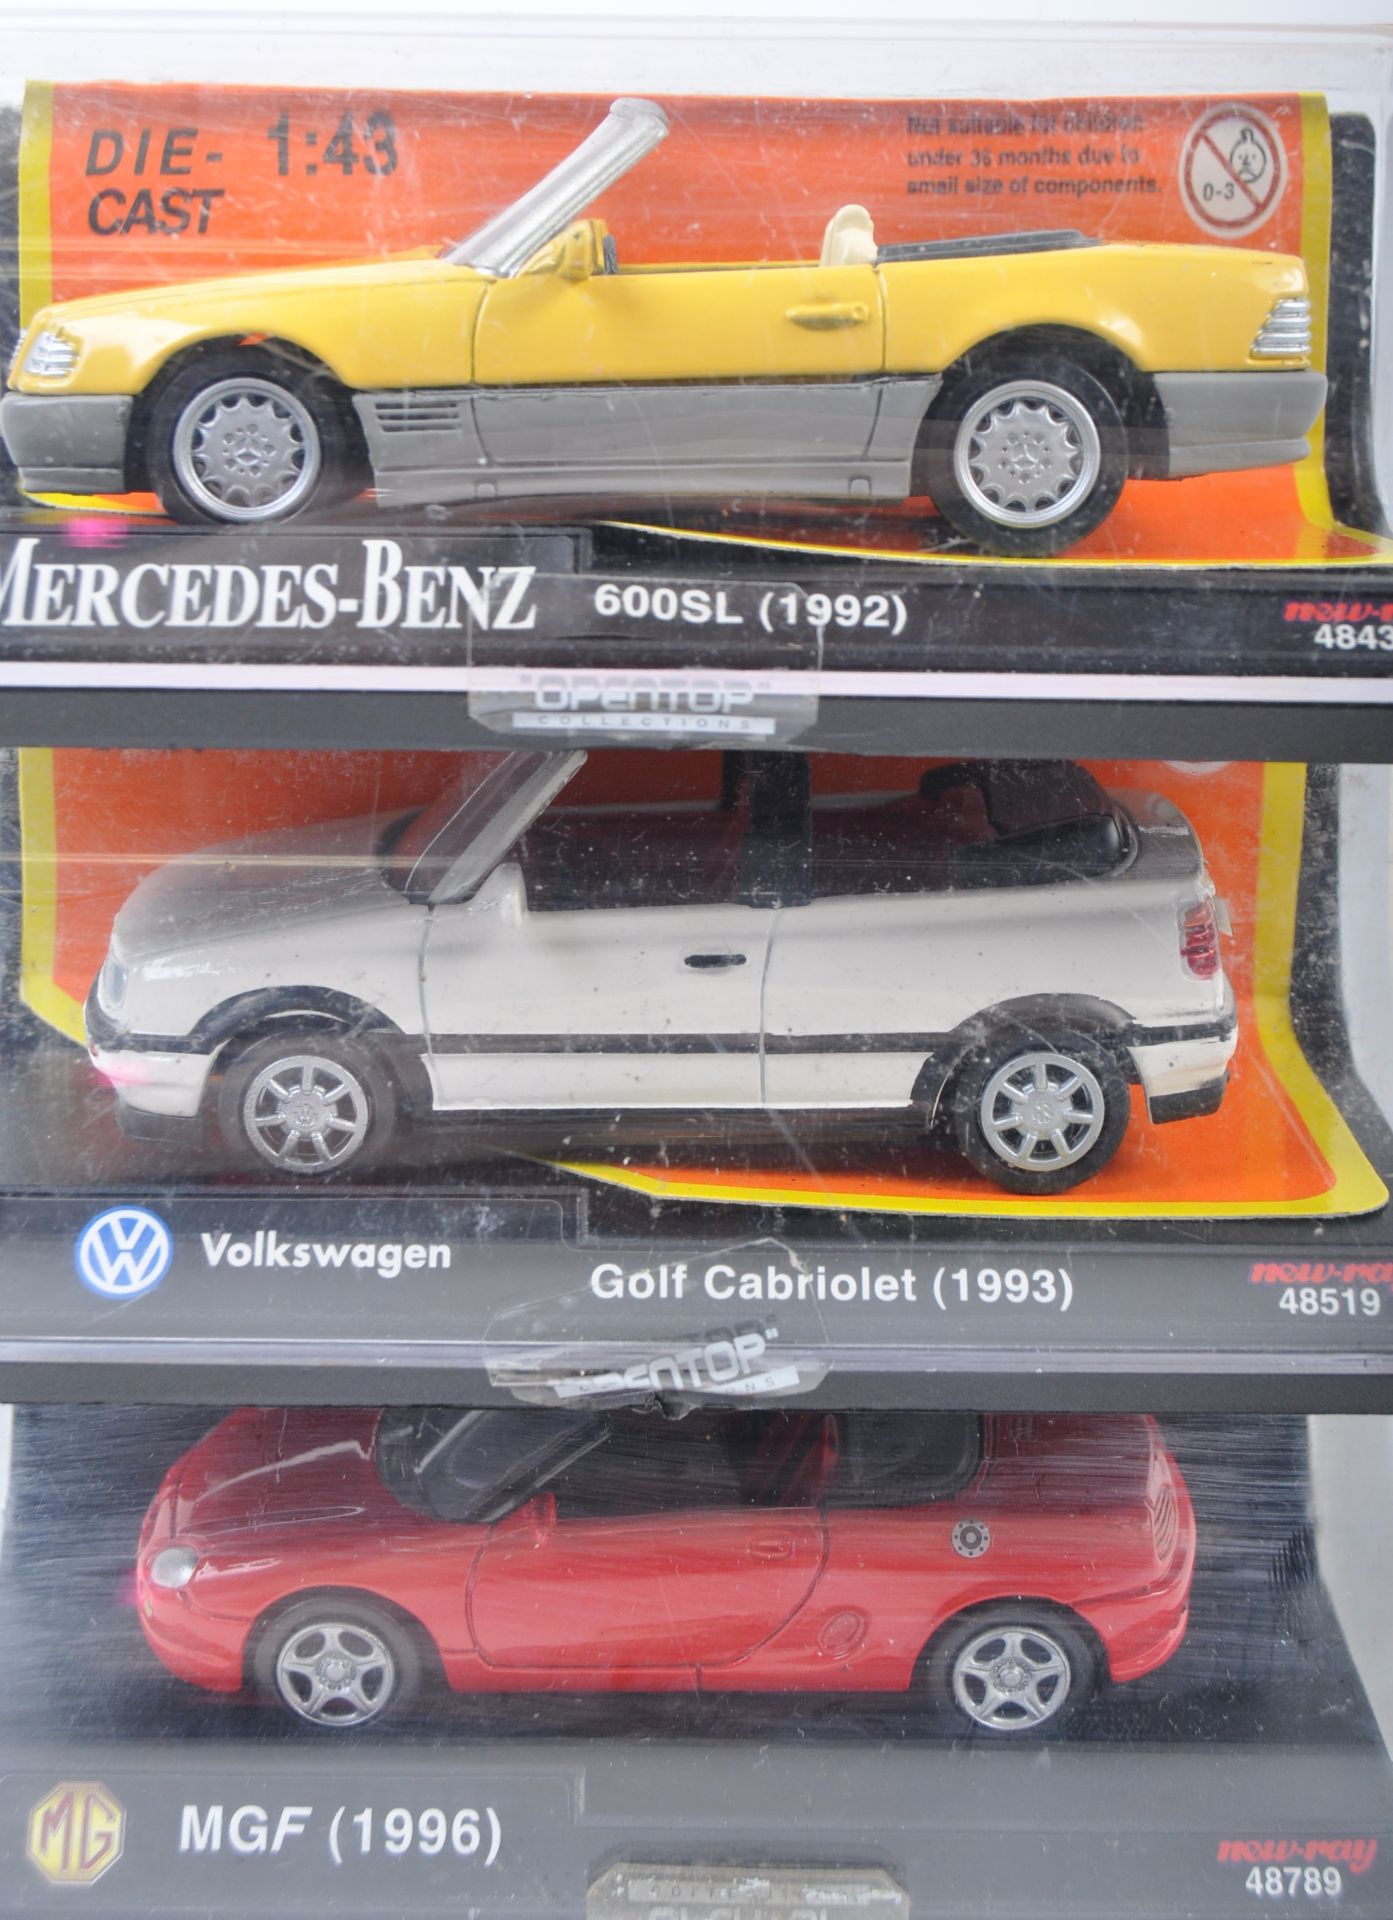 COLLECTION OF X5 NEW RAY 1/43 SCALE PRECISION DIECAST MODEL CARS - Image 2 of 4